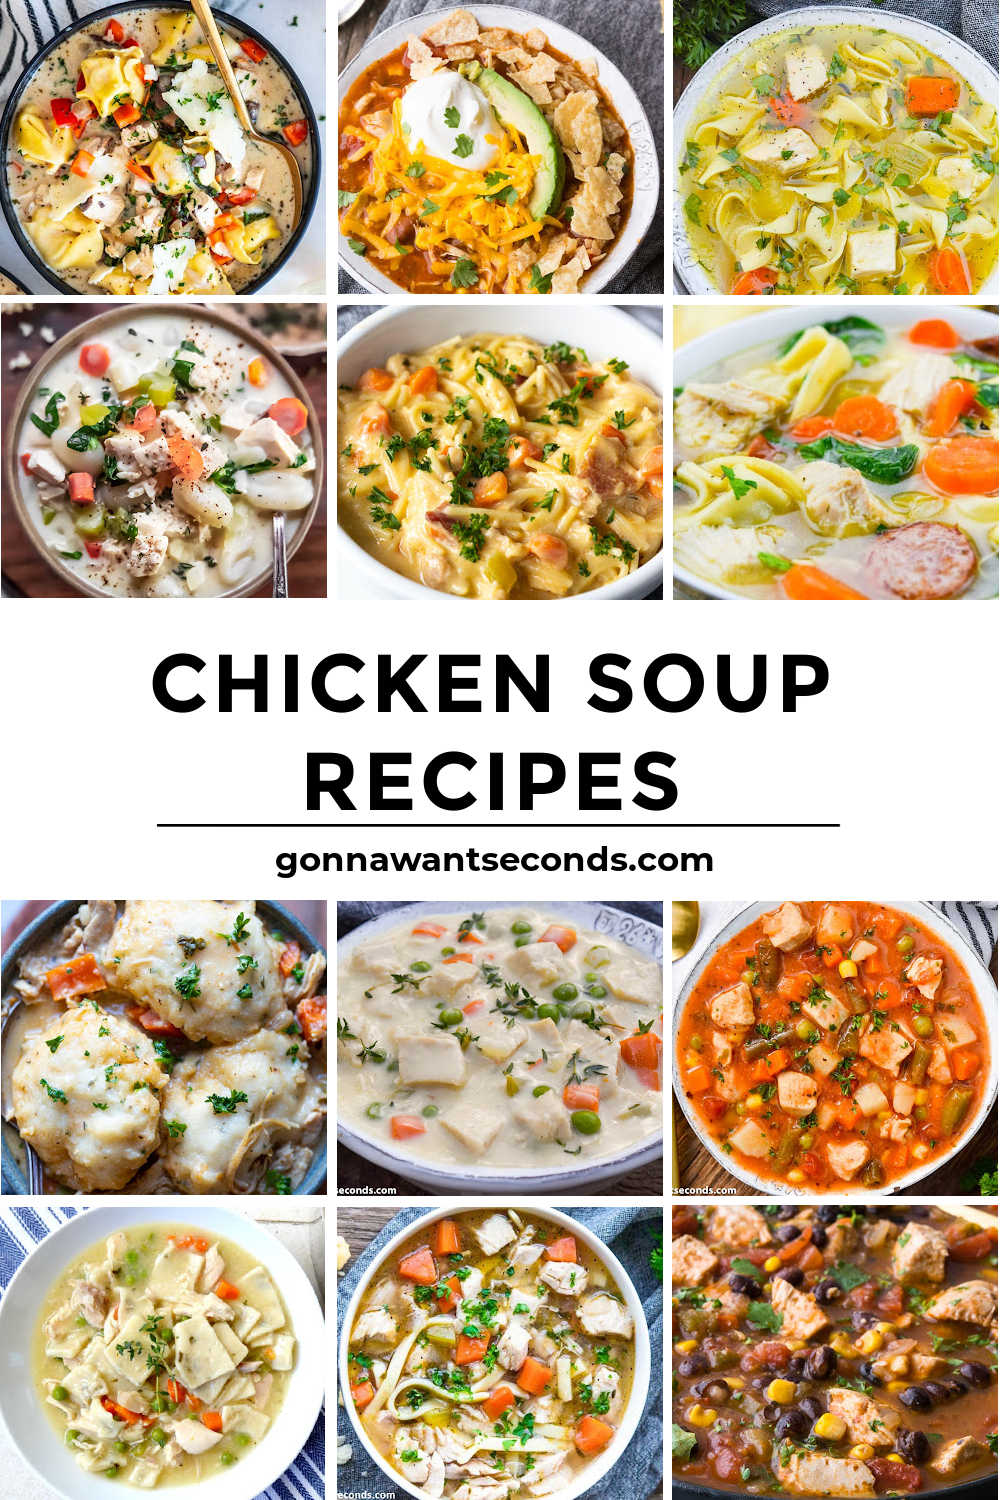 Chicken Soup Recipes montage